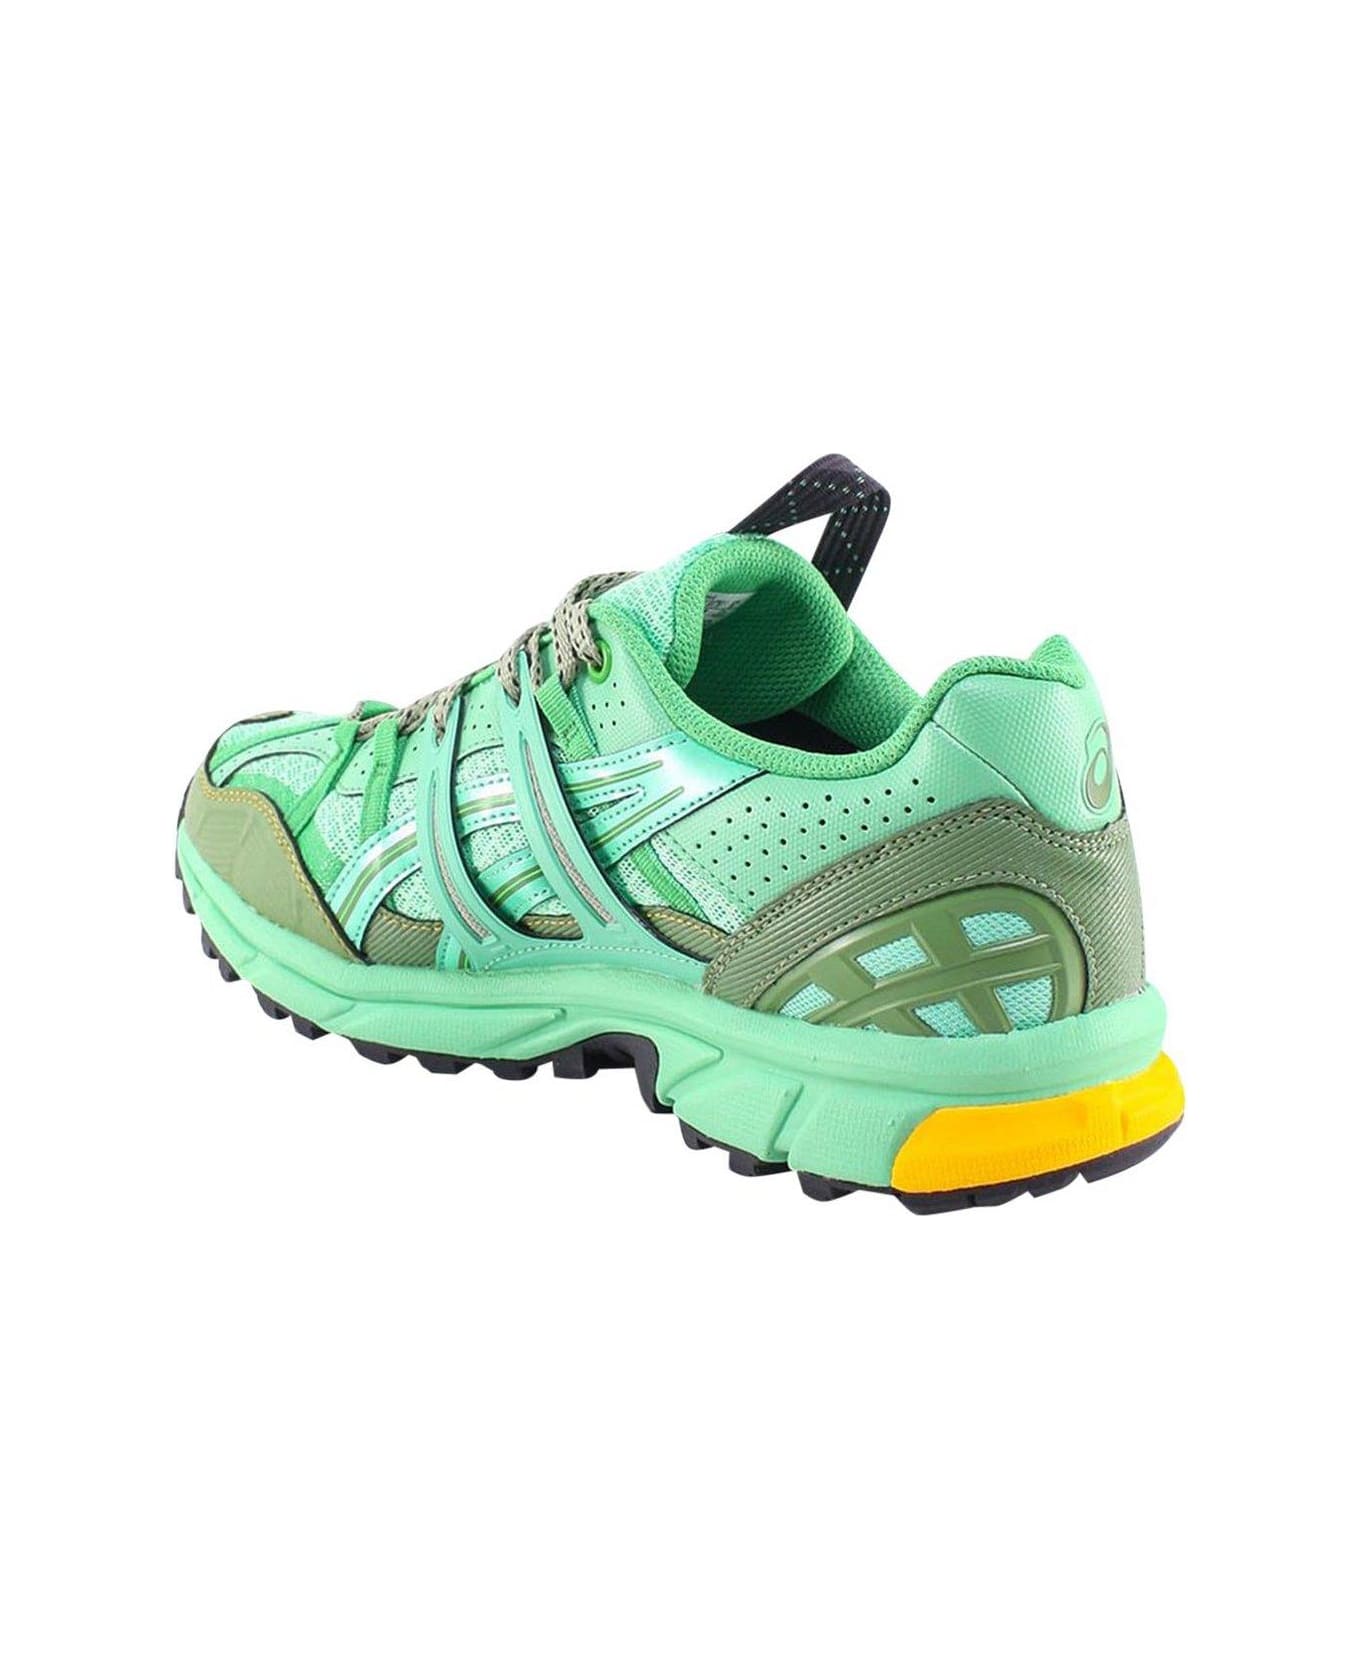 Asics Hs4-s Gel-sonoma Lace-up Sneakers - Green